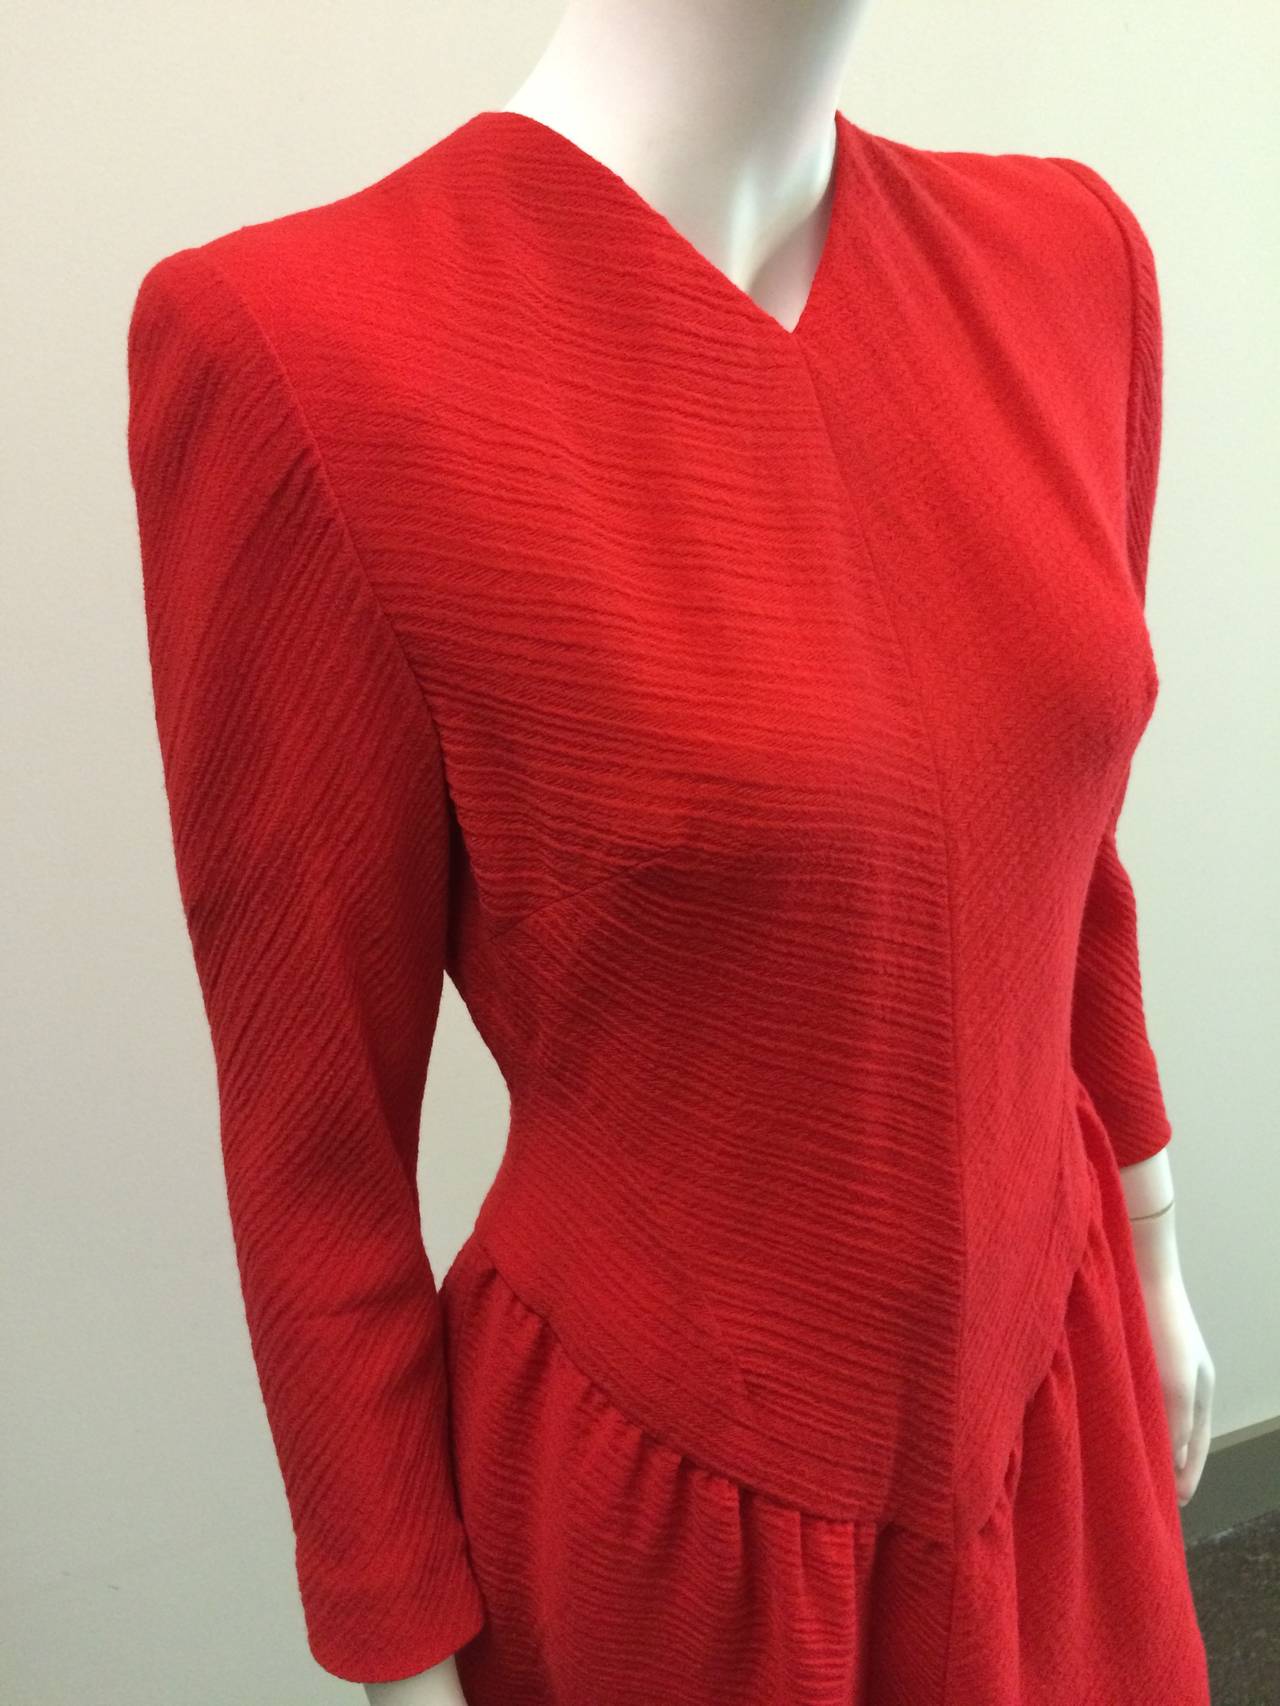 Pauline Trigere for Bergdorf Goodman 1980s Red Wool Dress Size 6. In Good Condition For Sale In Atlanta, GA